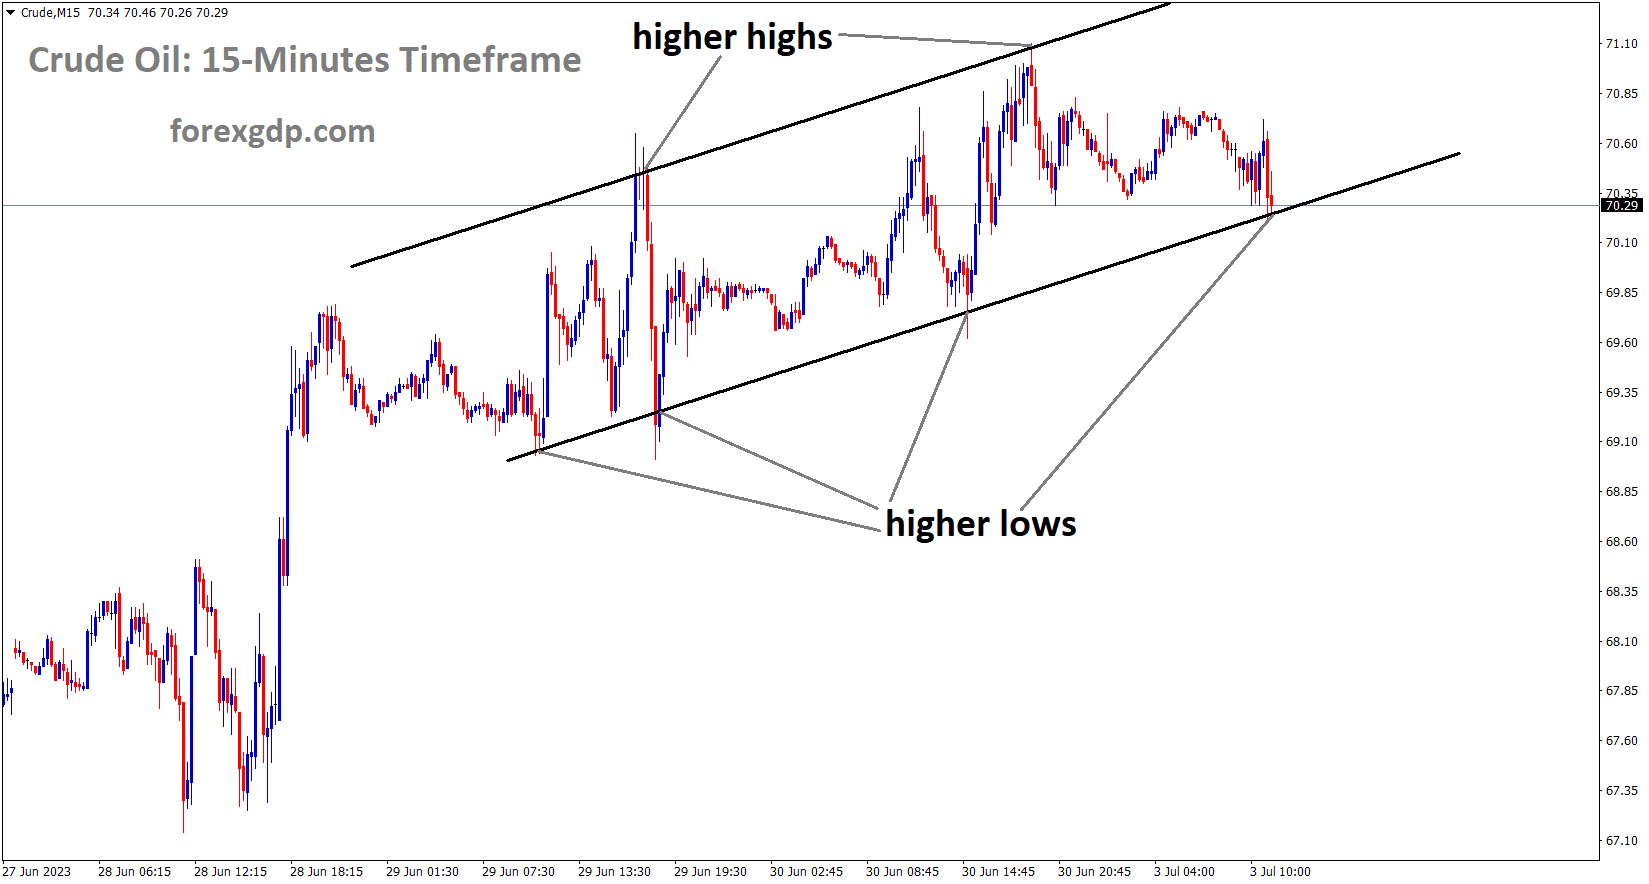 Crude oil Price is moving in an Ascending channel and the market has reached the higher low area of the channel